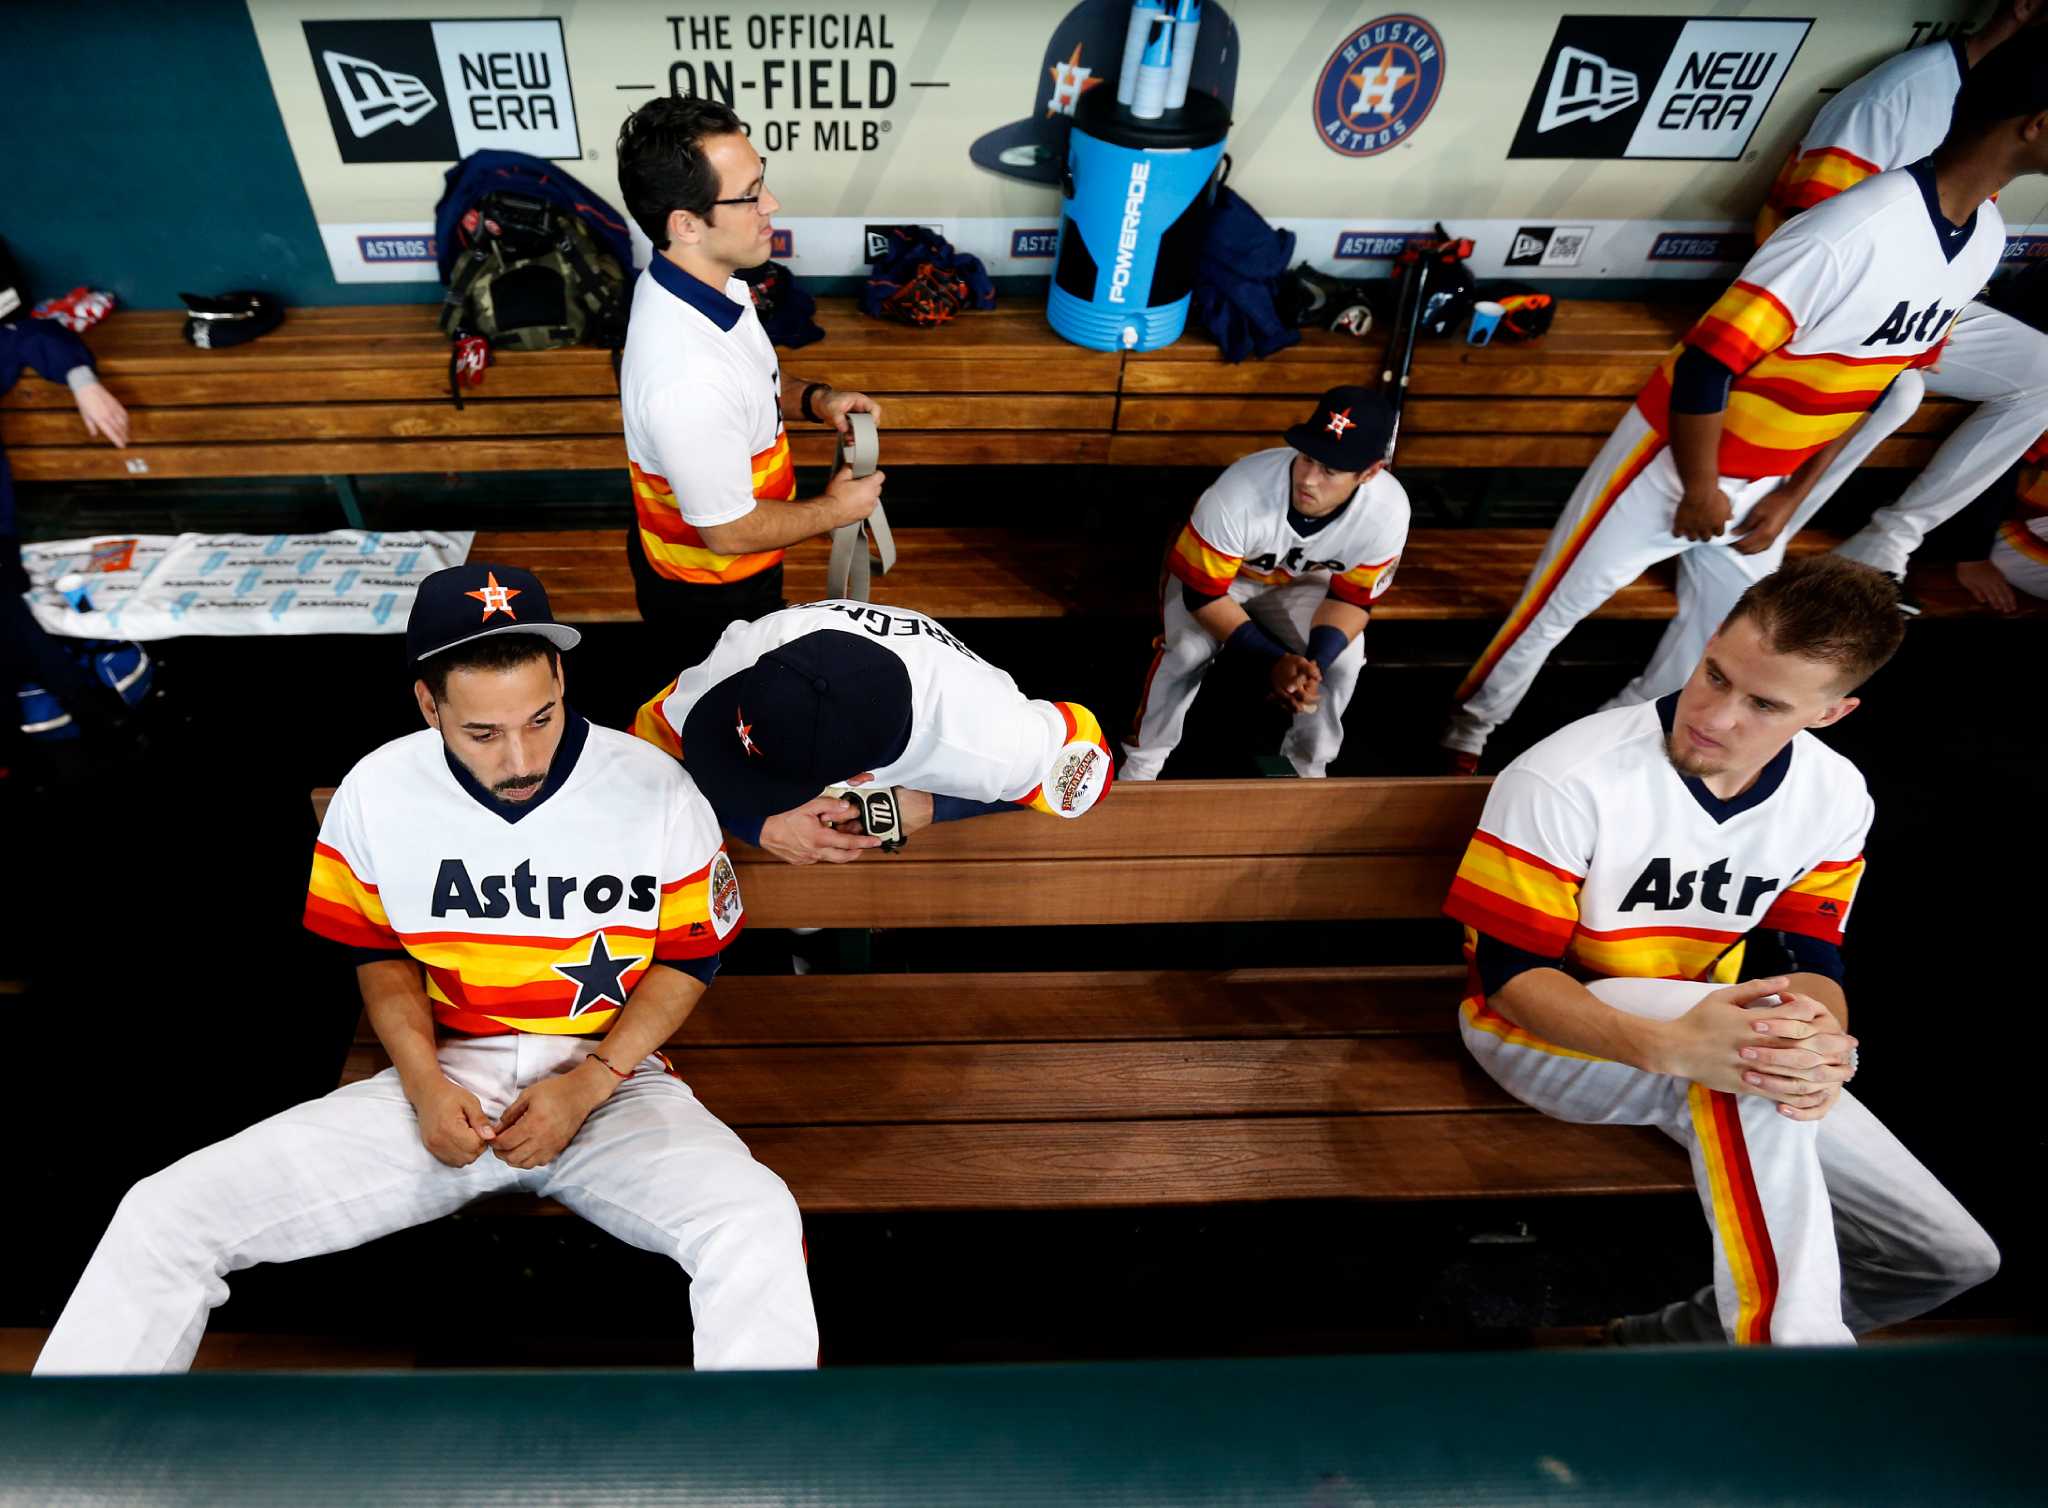 astros jerseys through the years